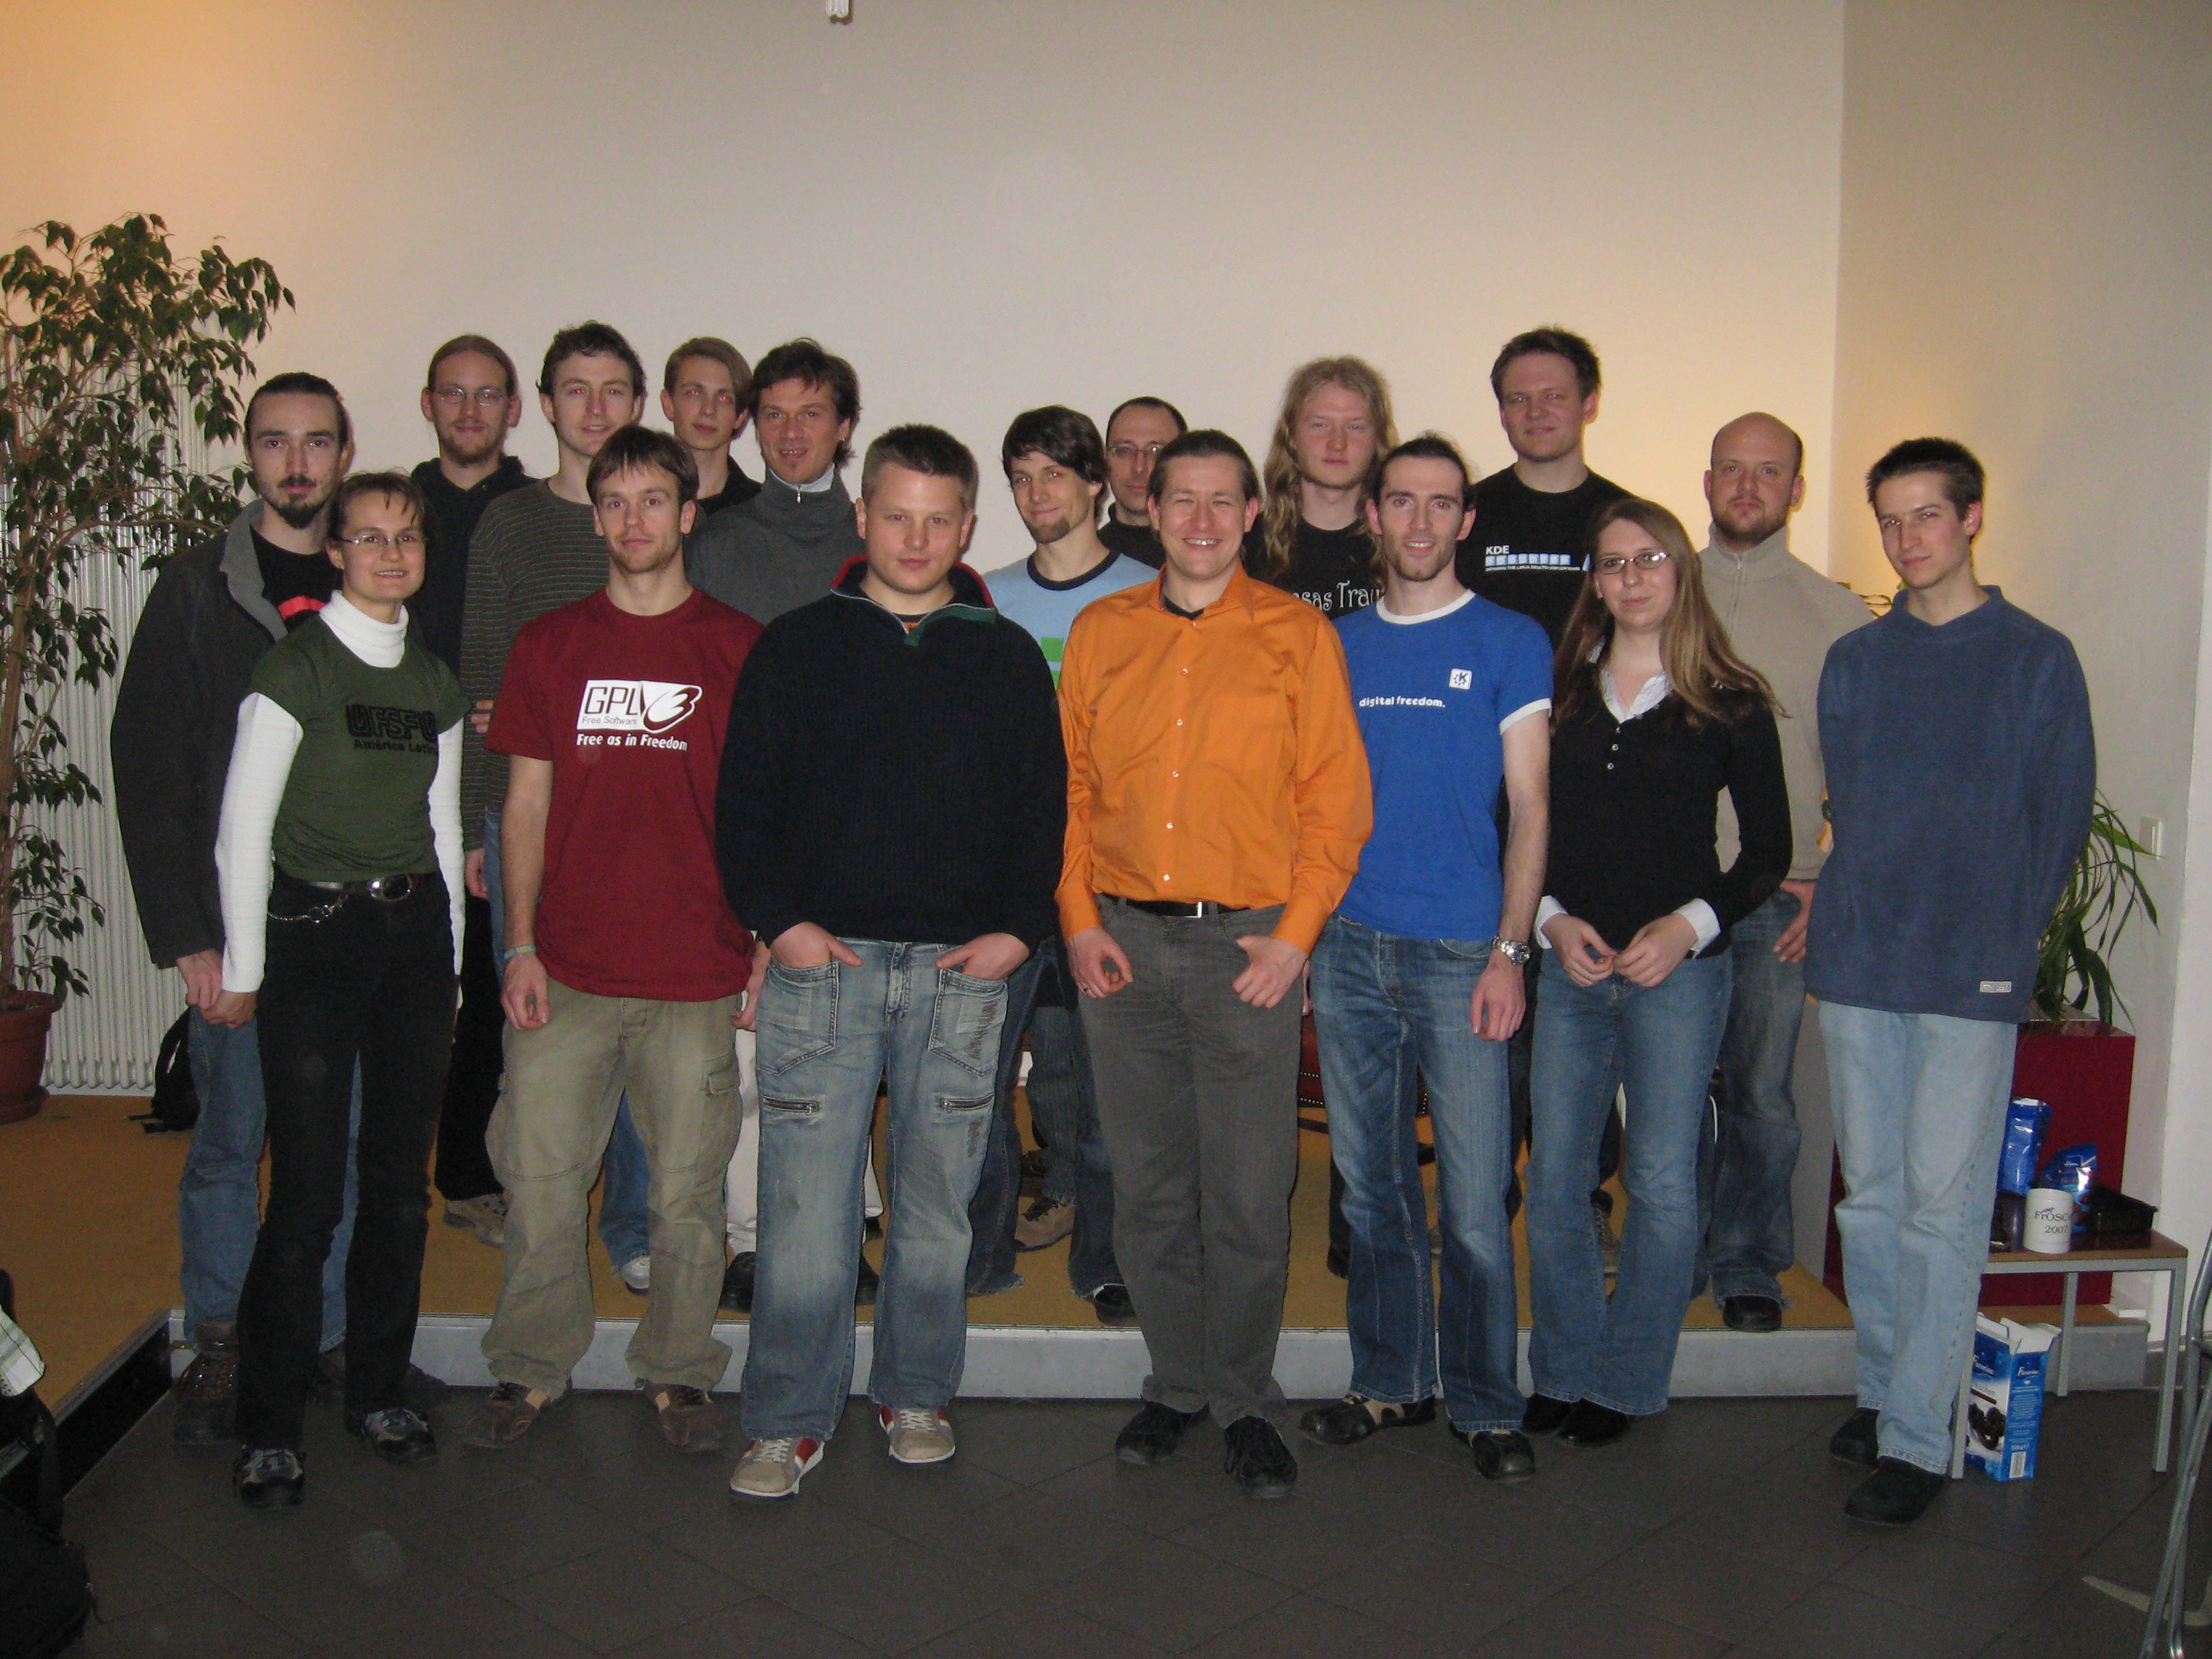 Group picture from Dezember's Fellowship meeting in
Berlin.